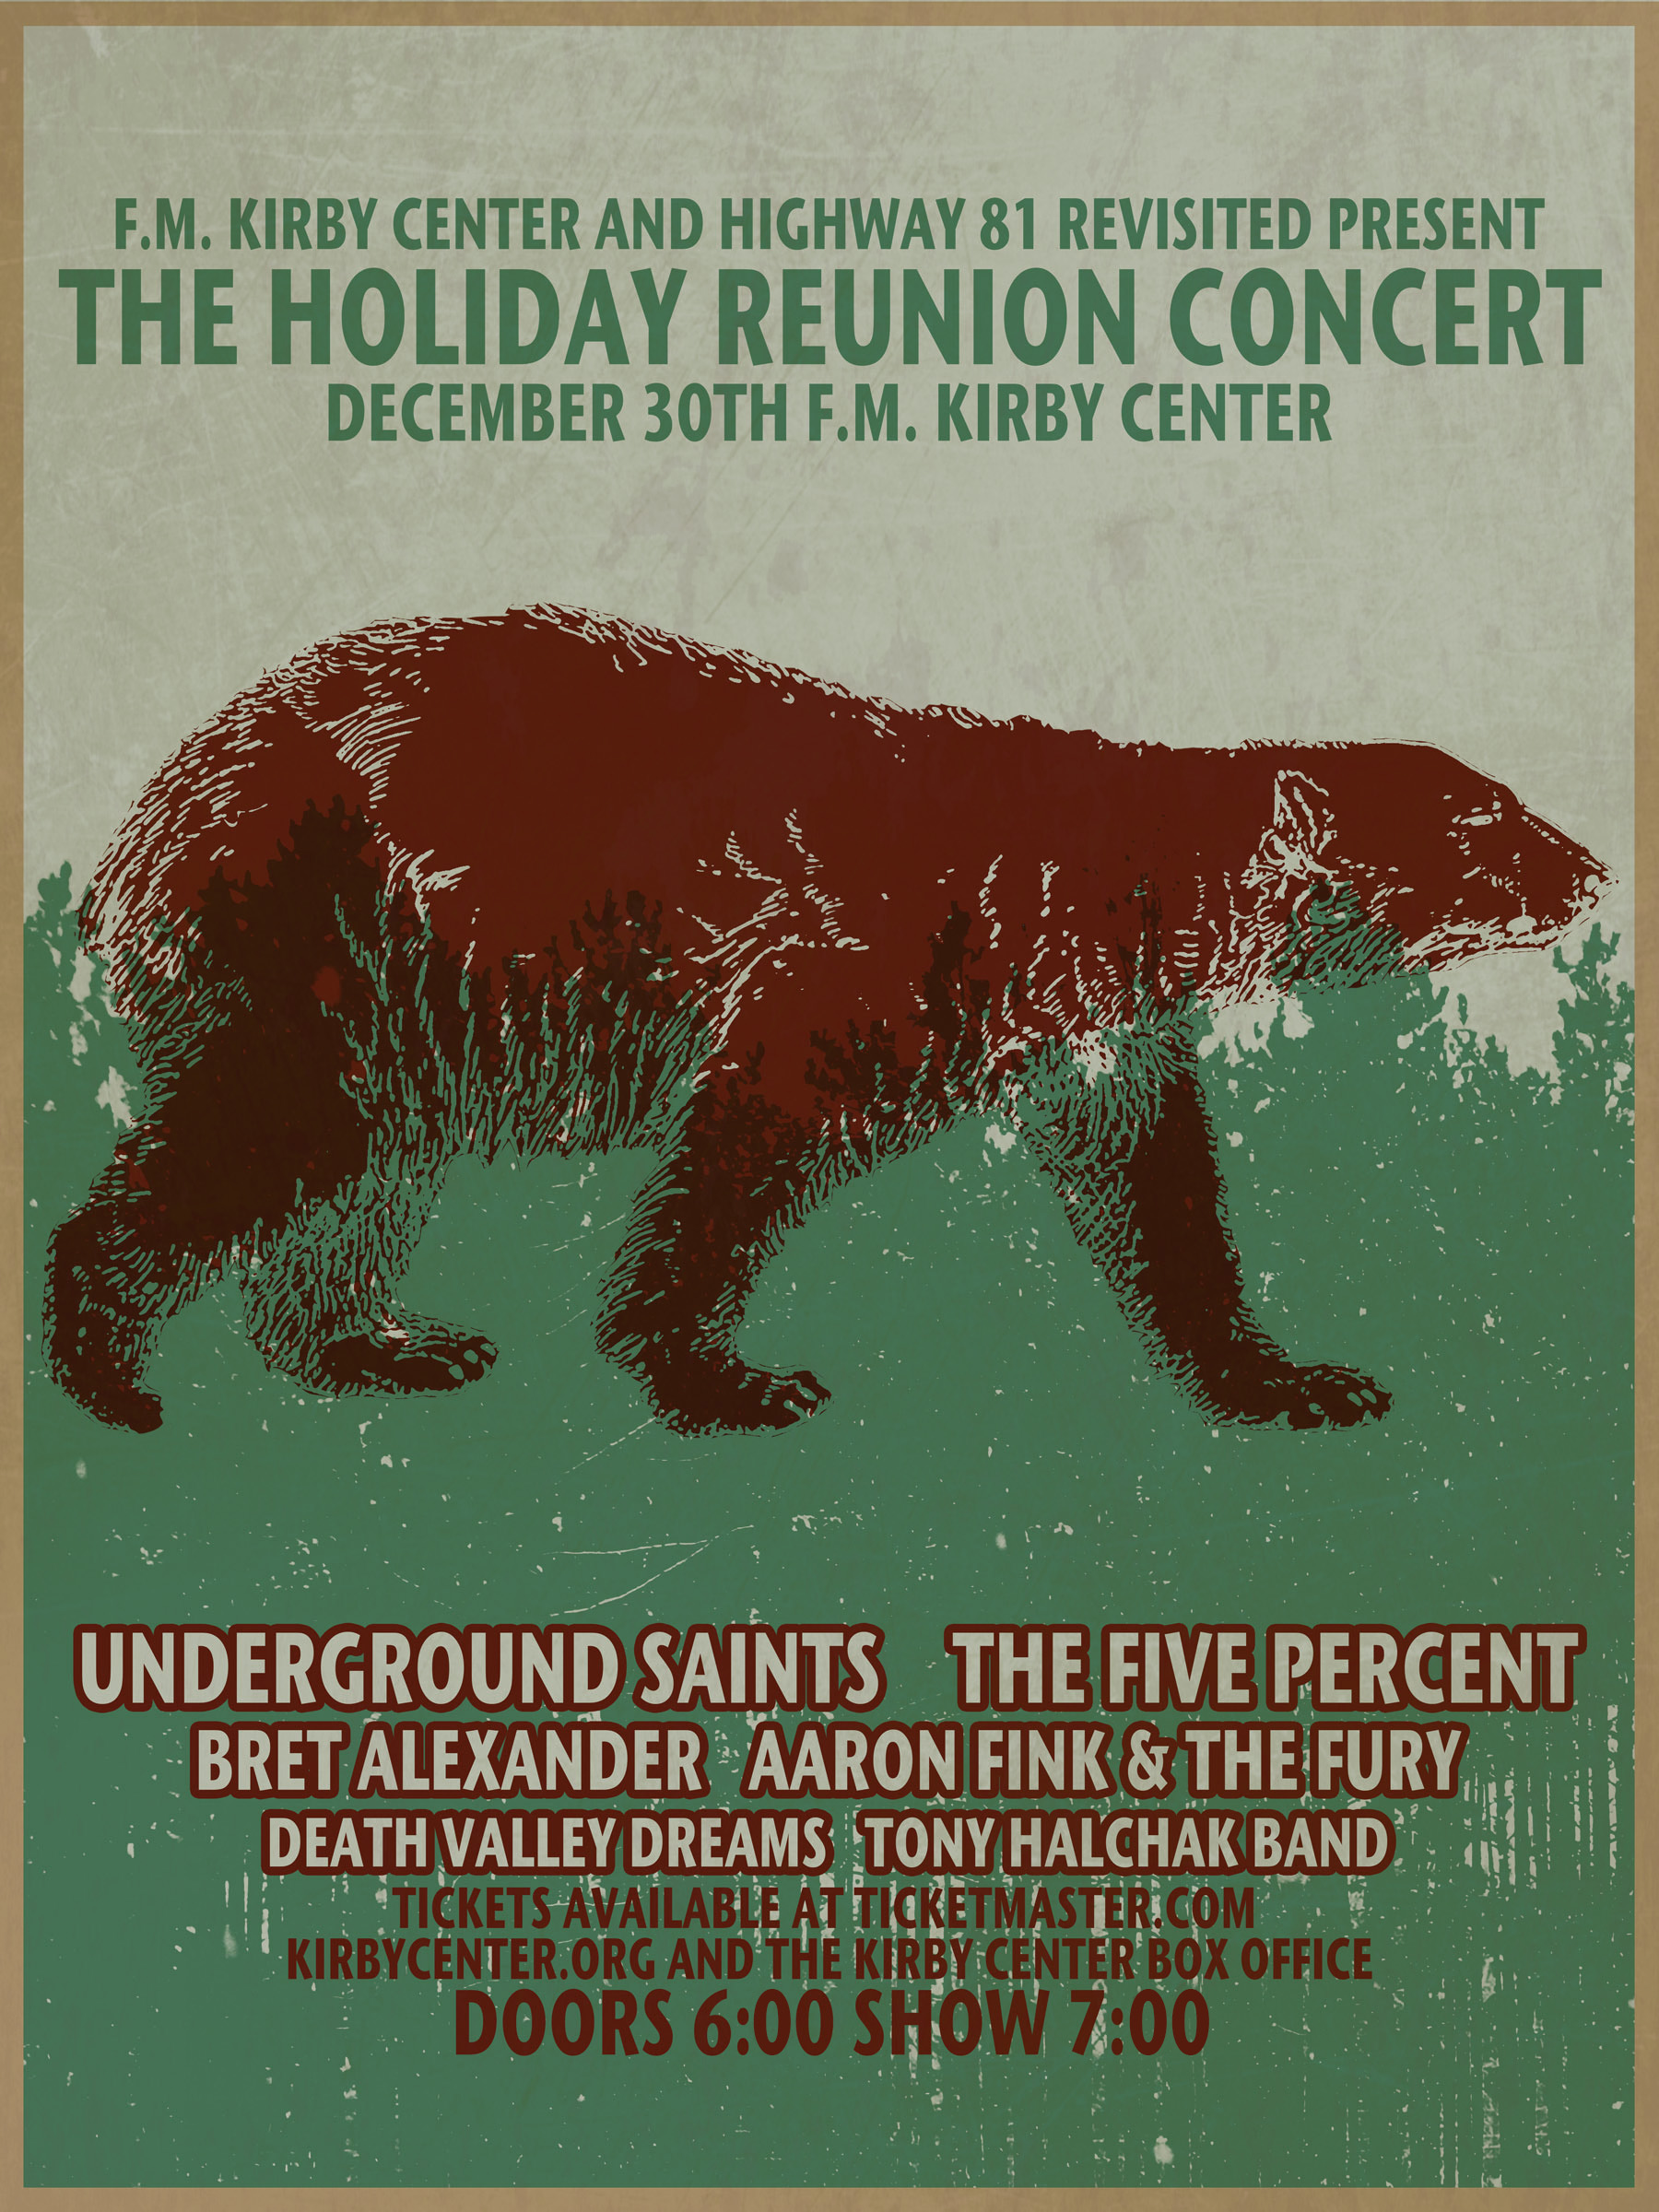 WEEKEND ROUNDUP: REUNION SHOW TICKET CONTEST, CYHSY ANNOUNCE NEW ALBUM, NEW FLAMING LIPS VIDEO